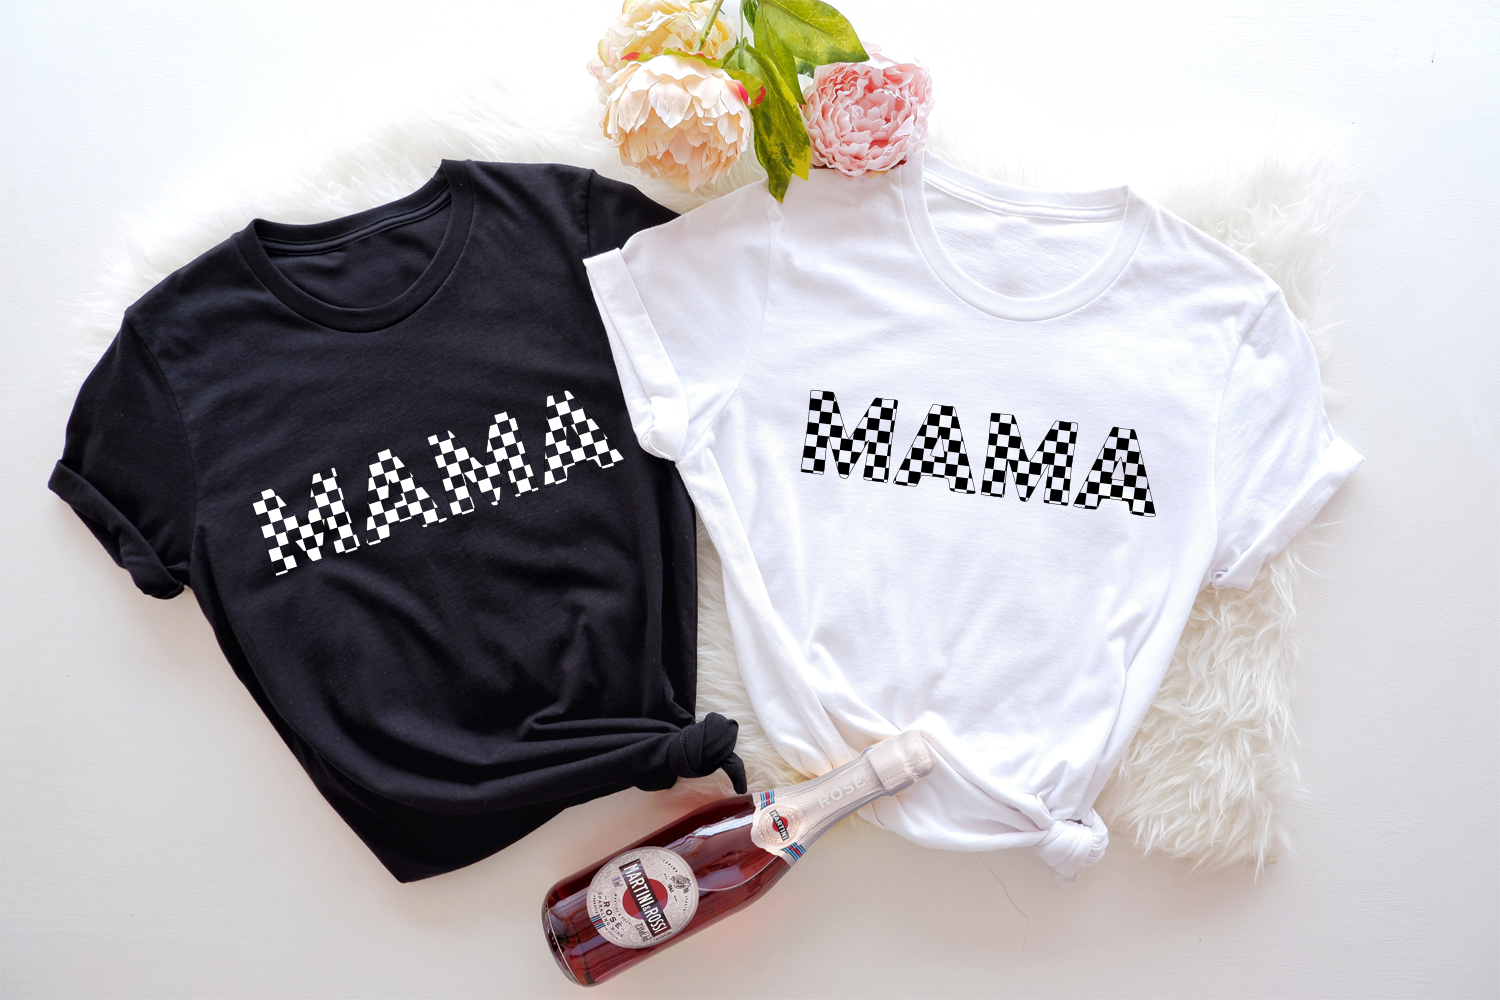 Retro Mama Shirt: A throwback tee for moms who love vintage style.